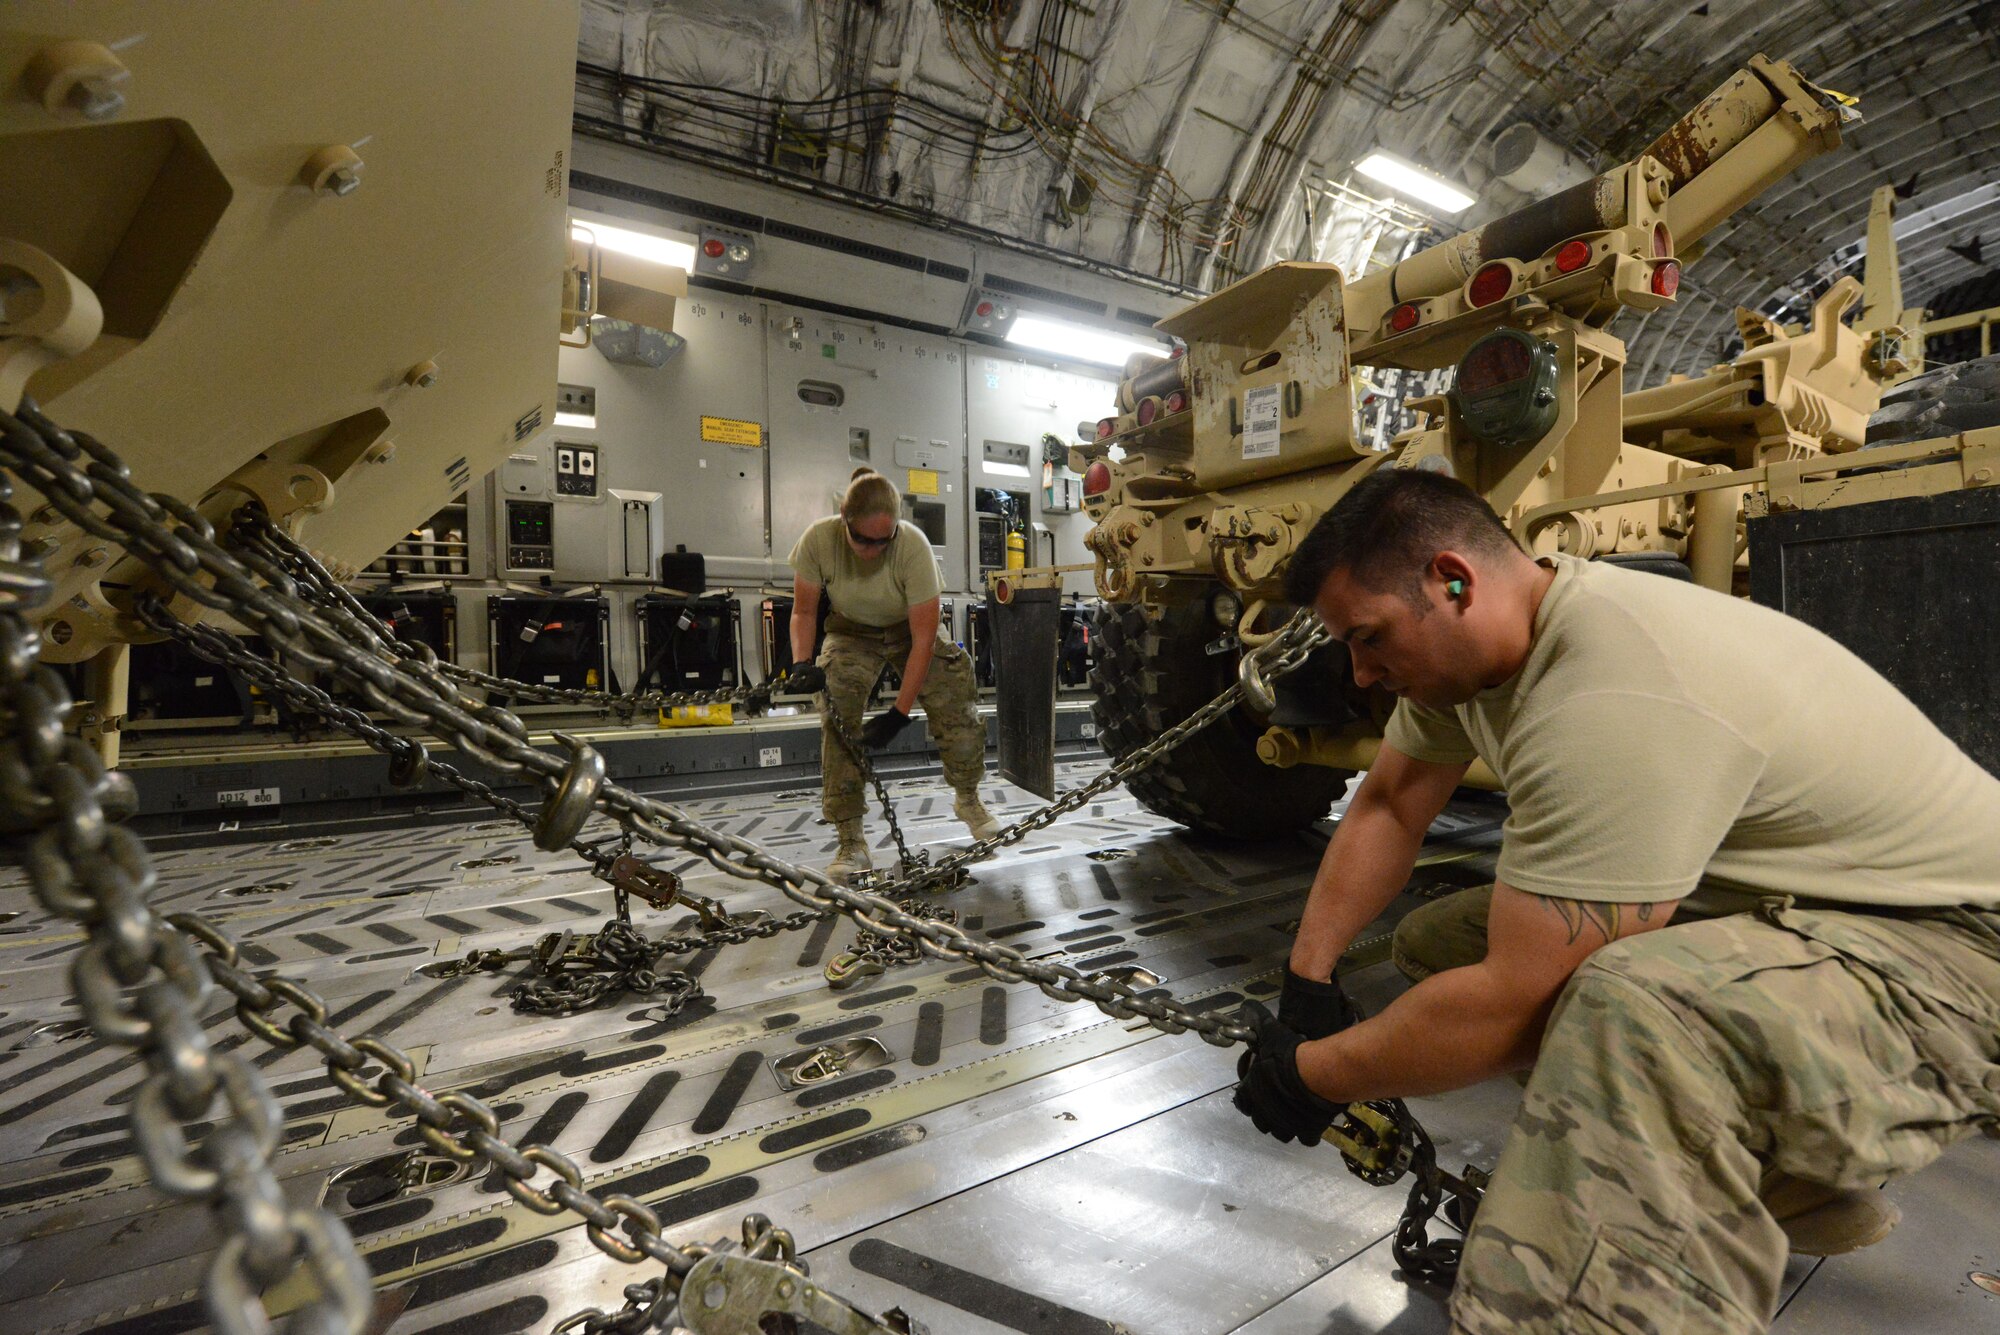 U.S. Air Force Master Sgt. Jessica Mallet, 455th Expeditionary Aerial Port Squadron Detachment 1 chief, and Staff Sgt. Reuben Montes, an air transportation journeyman, work together to secure armored vehicles aboard a C-17 Globemaster III while at Mazar-e Sharif, Afghanistan June 24, 2014. As part of the retrograde mission, EAPS Det 1 is responsible for inspecting and loading cargo and vehicles leaving Mazar-e Sharif. Mallett, a native of Clarksville, Tenn., is deployed from the 735th Air Mobility Squadron, Joint Base Pearl Harbor-Hickam, Hawaii, while Montes is a native of Worthington, Ohio and deployed from the 375th Logistics Readiness Squadron, Scott Air Force Base, Ill. (U.S. Air Force photo by Master Sgt. Cohen A. Young/Released)  